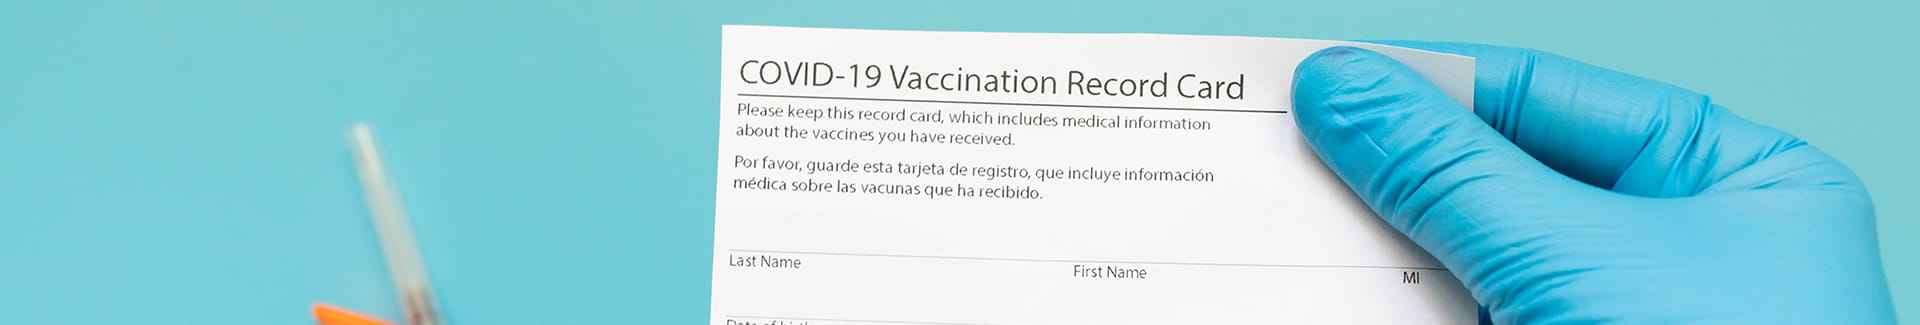 Proof of COVID-19 vaccination - vaccination record card